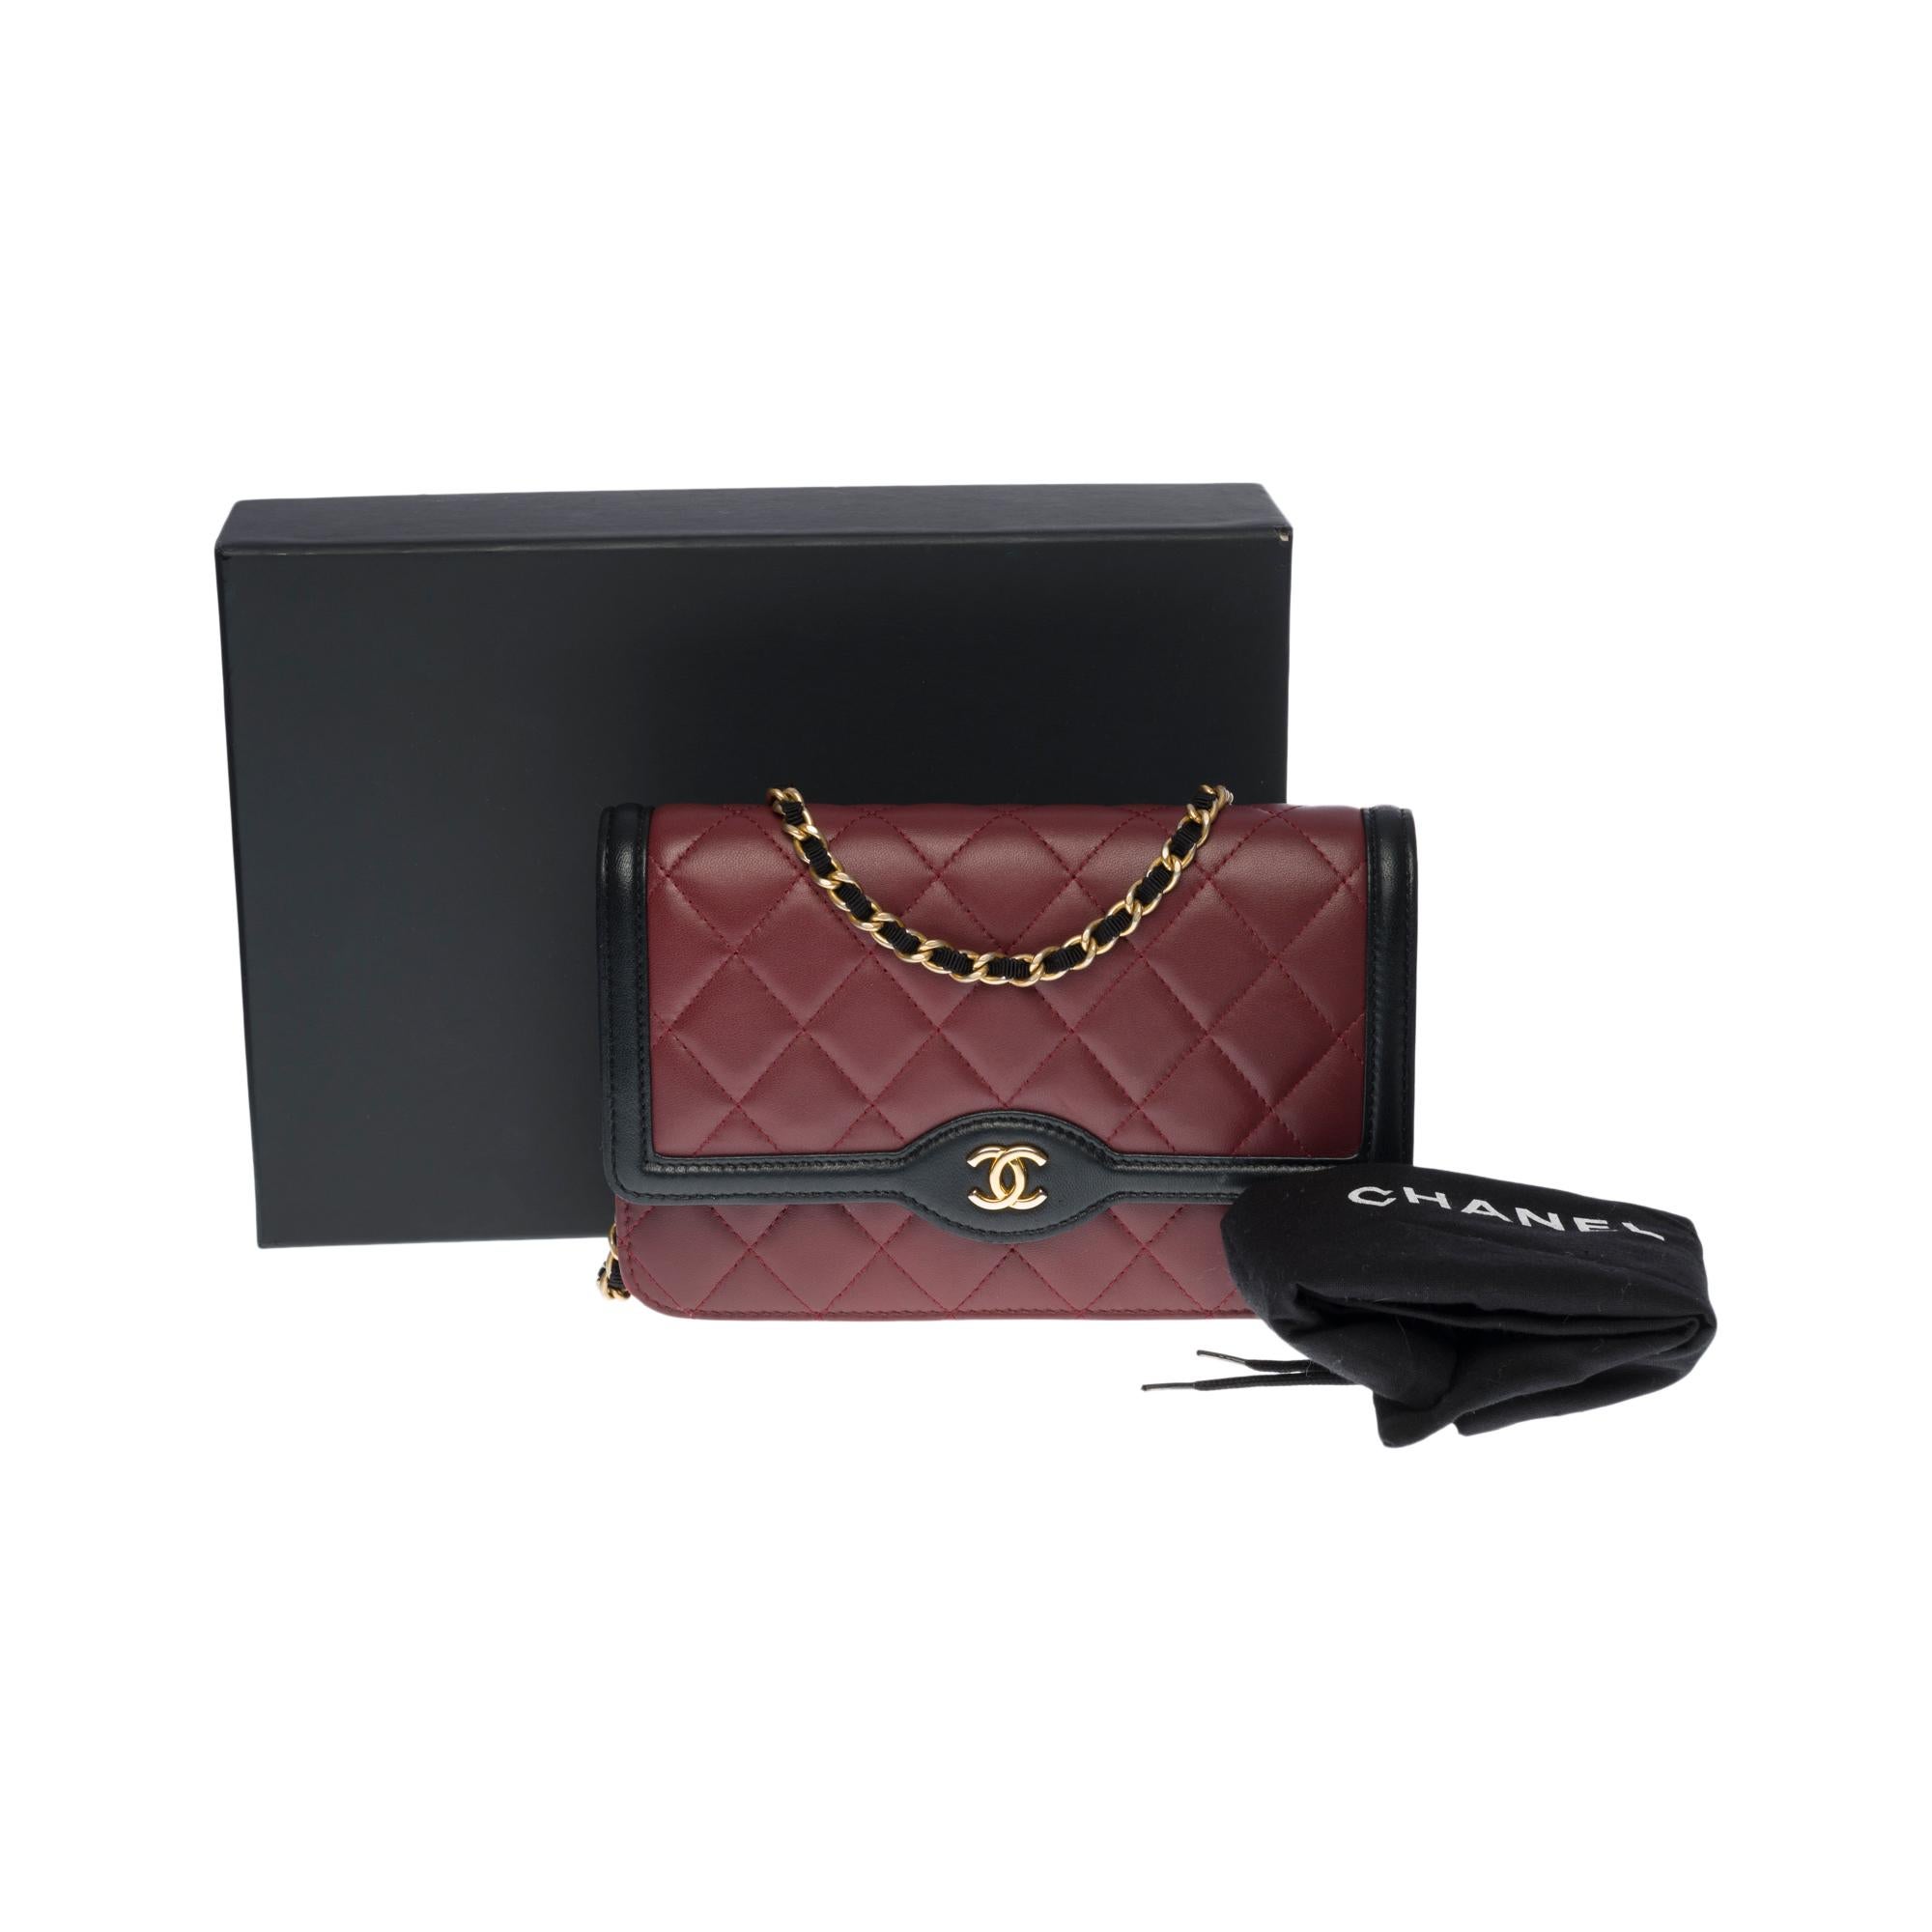 Chanel Wallet on Chain shoulder bag in burgundy/black quilted leather, GHW 4